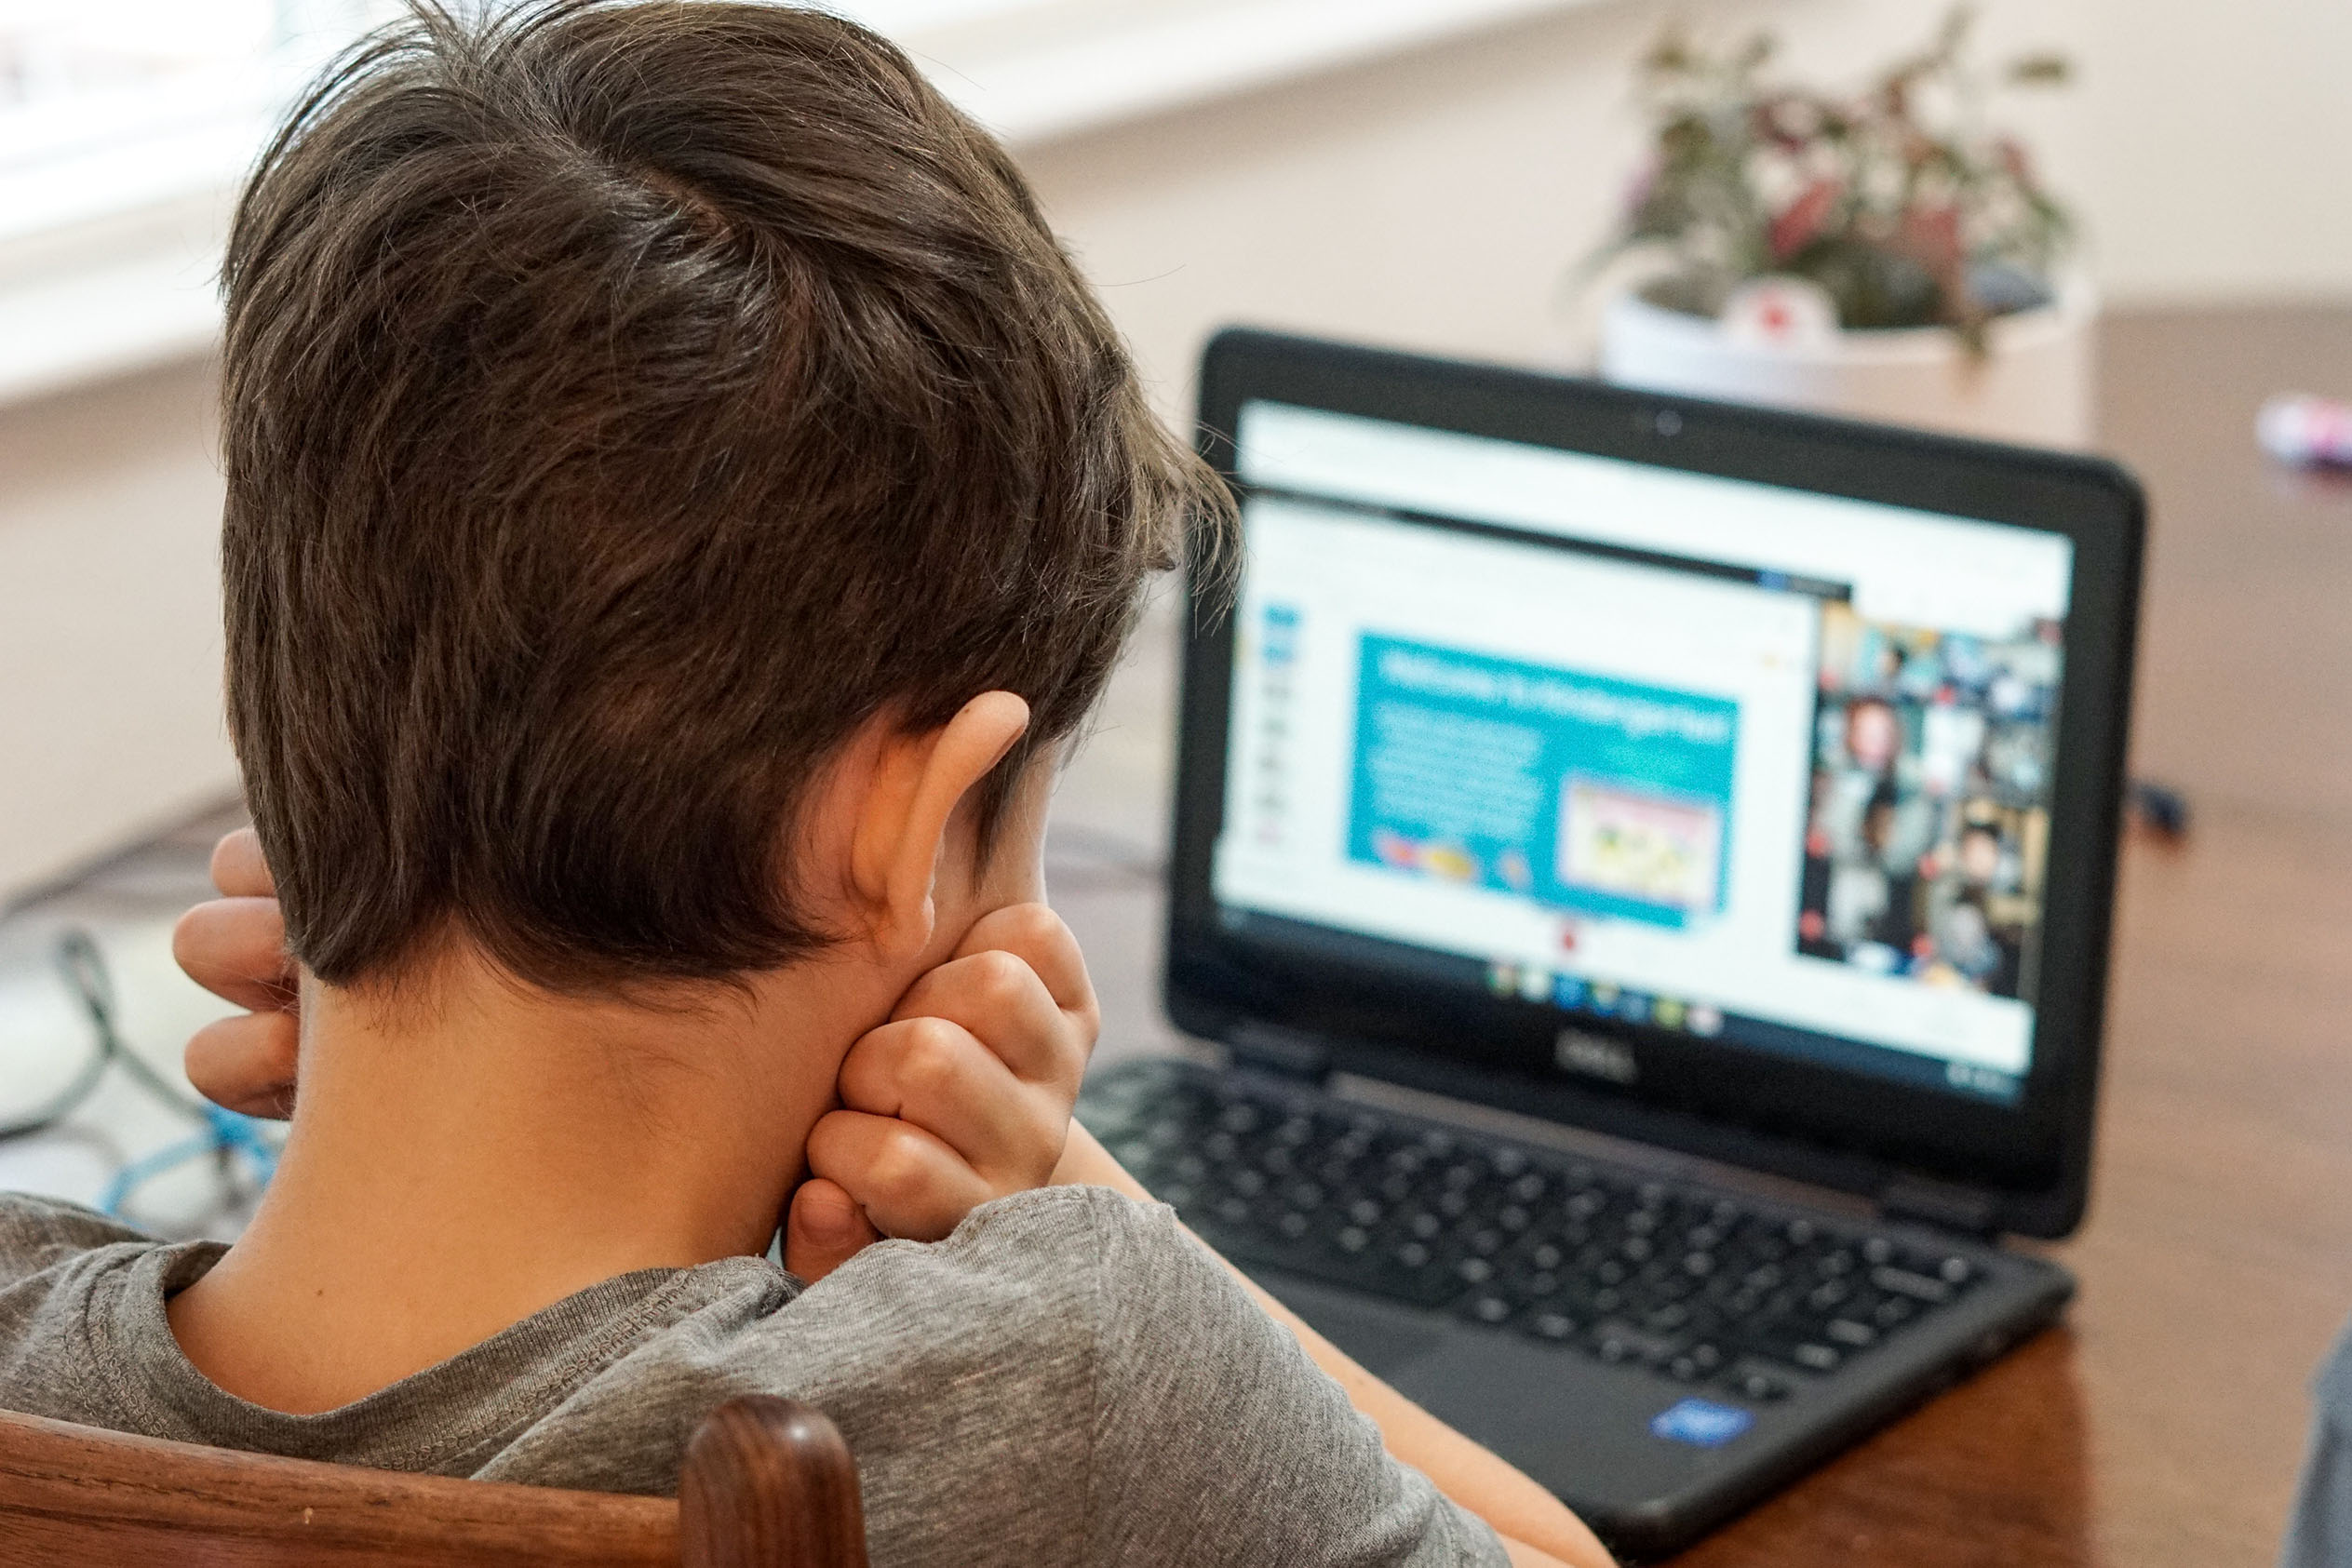 Back of boy's head as he looks at a laptop screen during school.